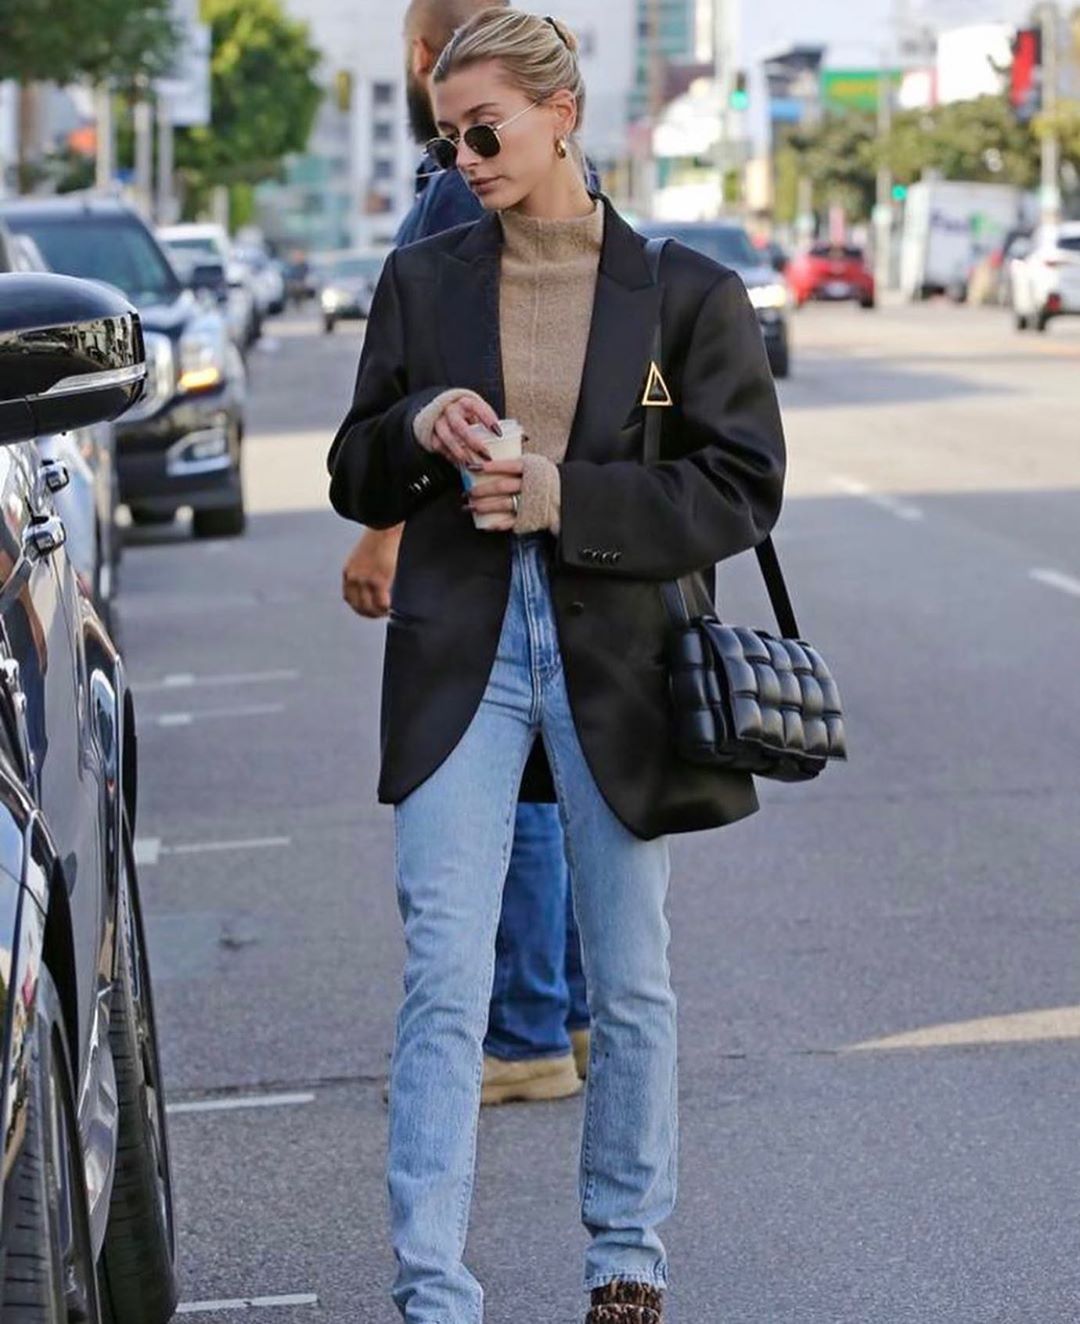 Hailey Bieber Wore the Ideal Cold-Weather Look